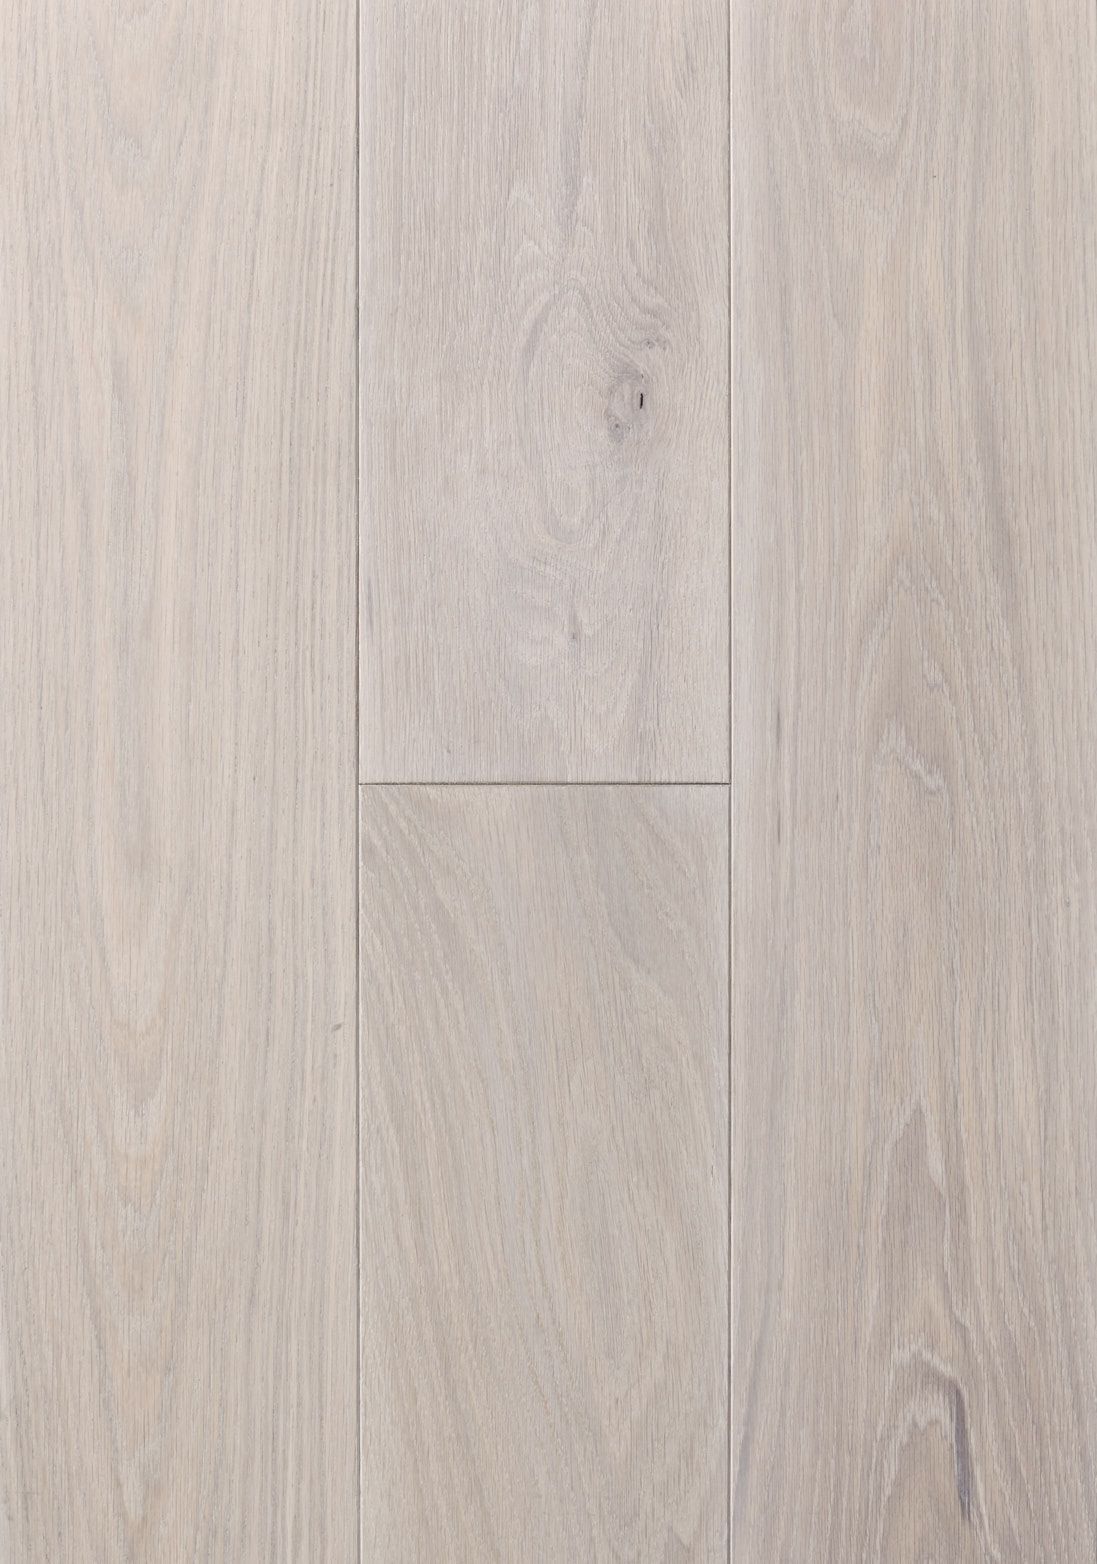 The beauty of the wood laminate flooring